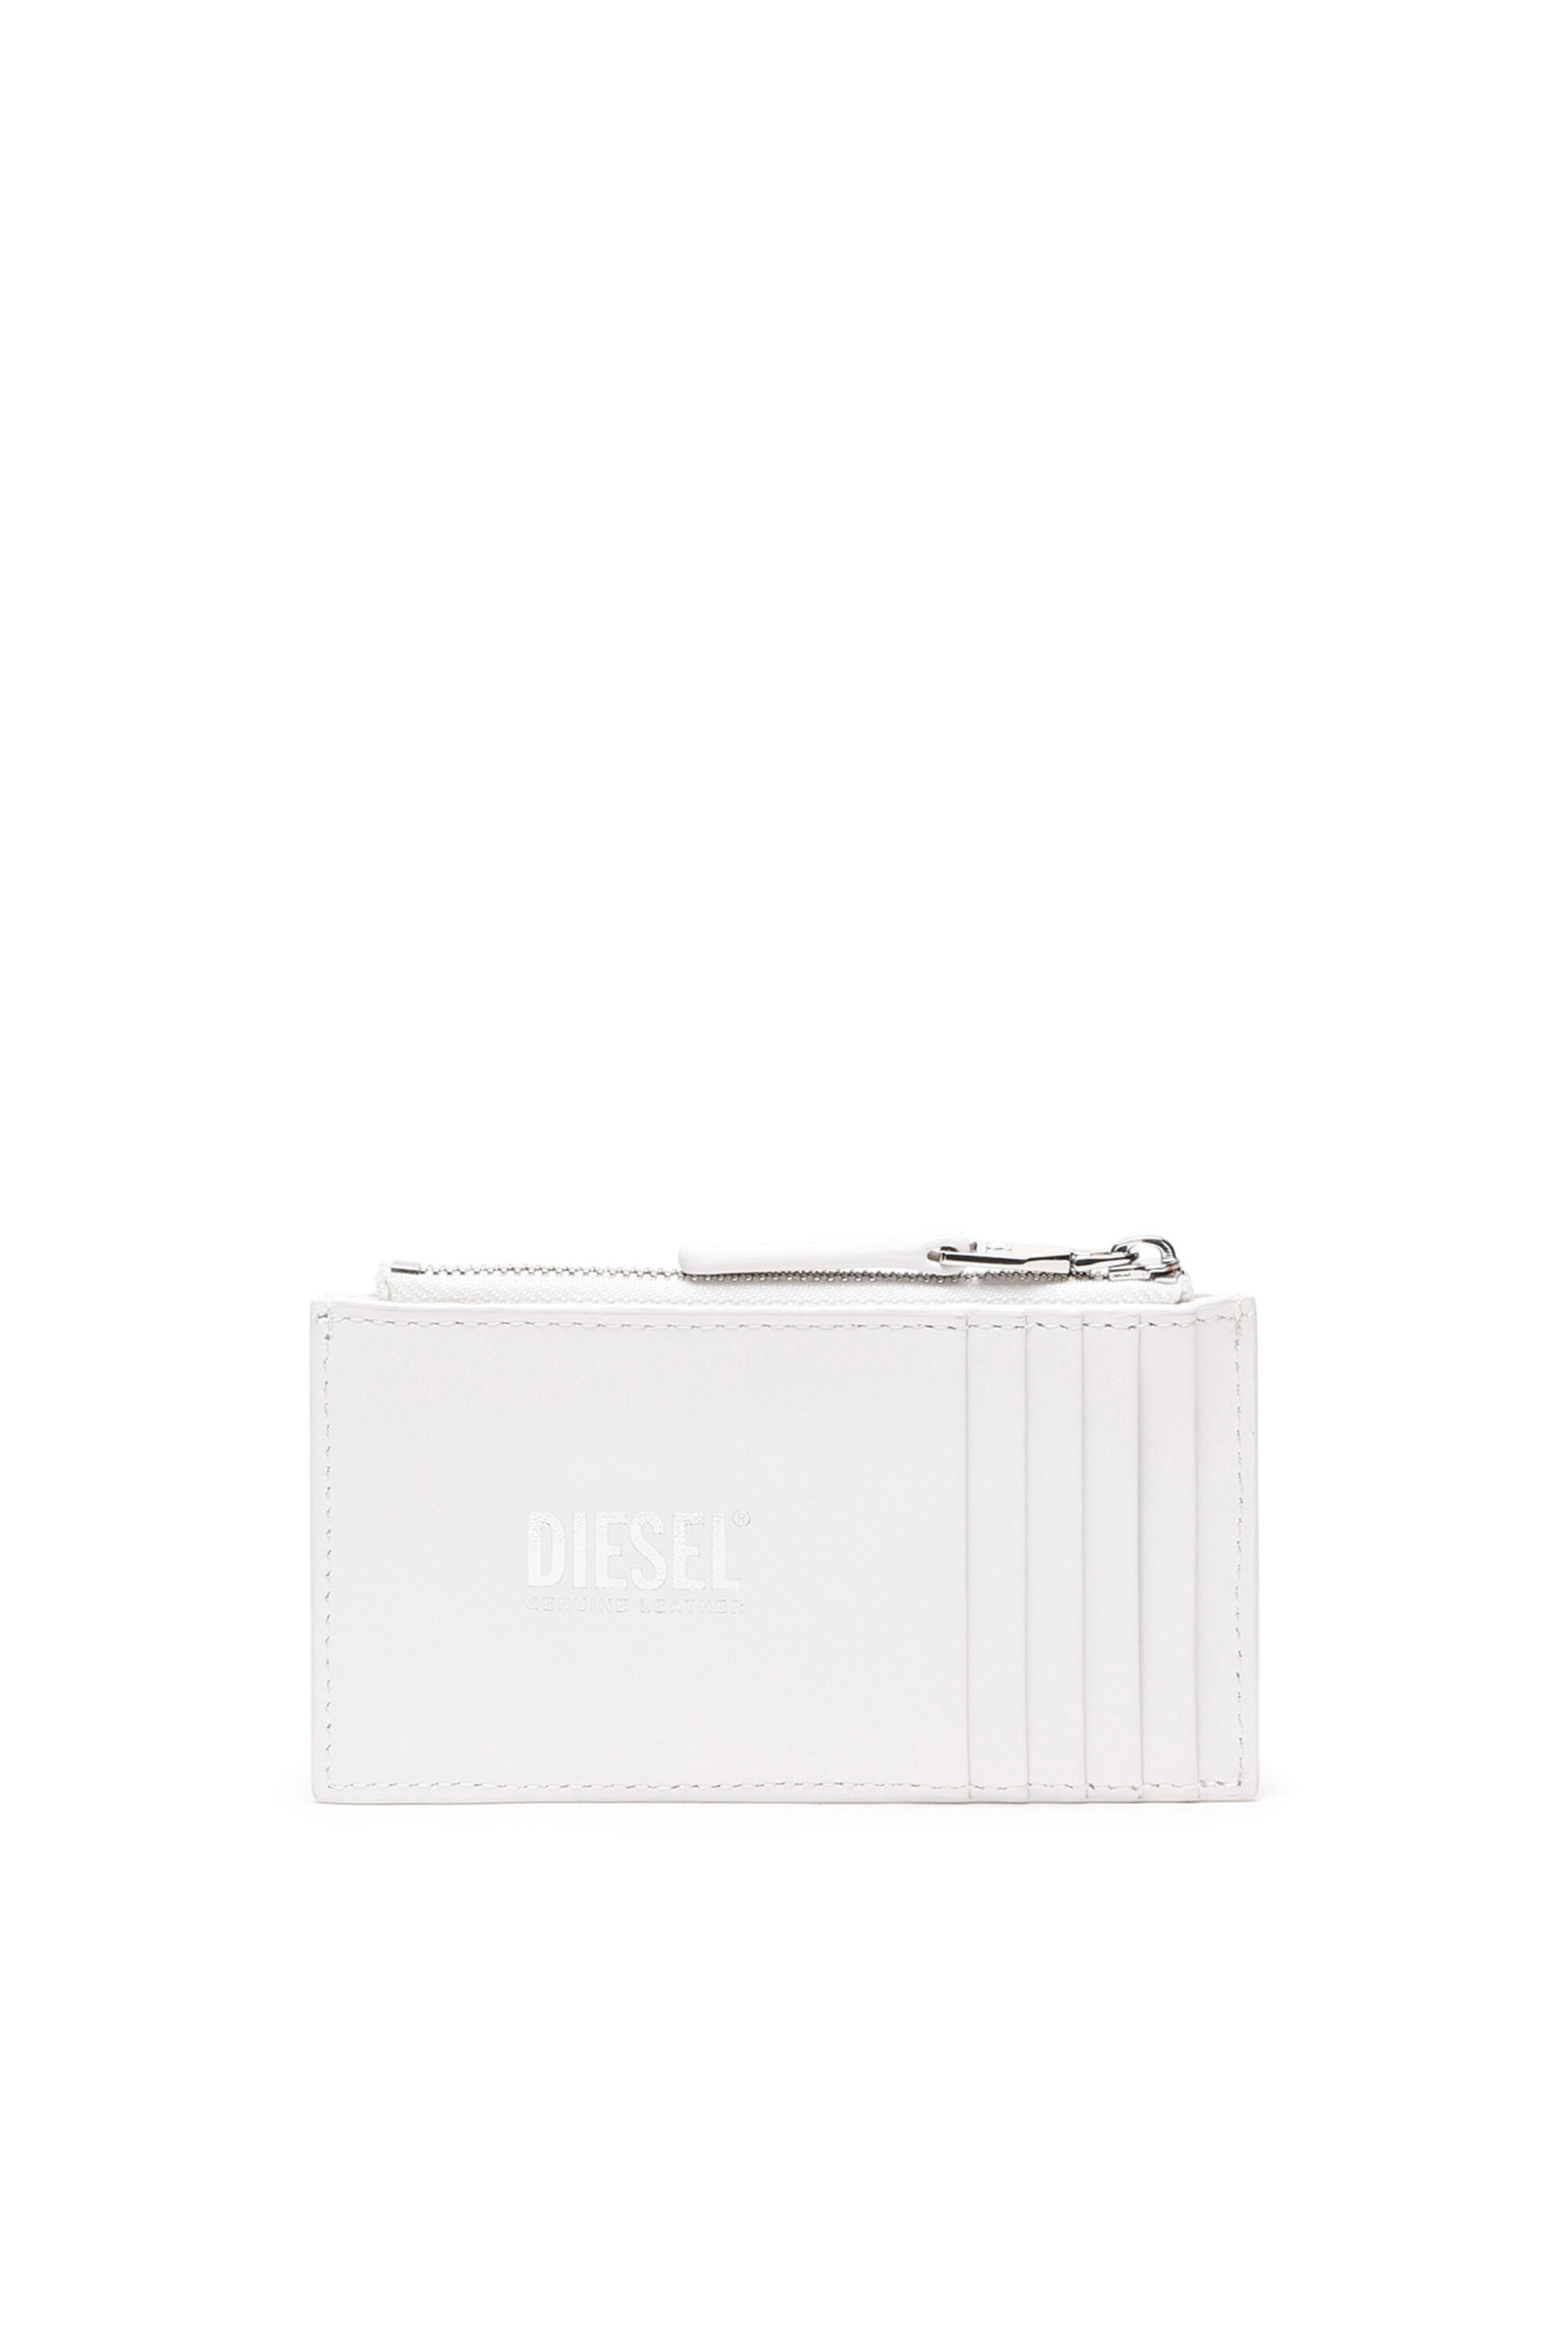 Diesel - PAOULINA, Blanc - Image 2